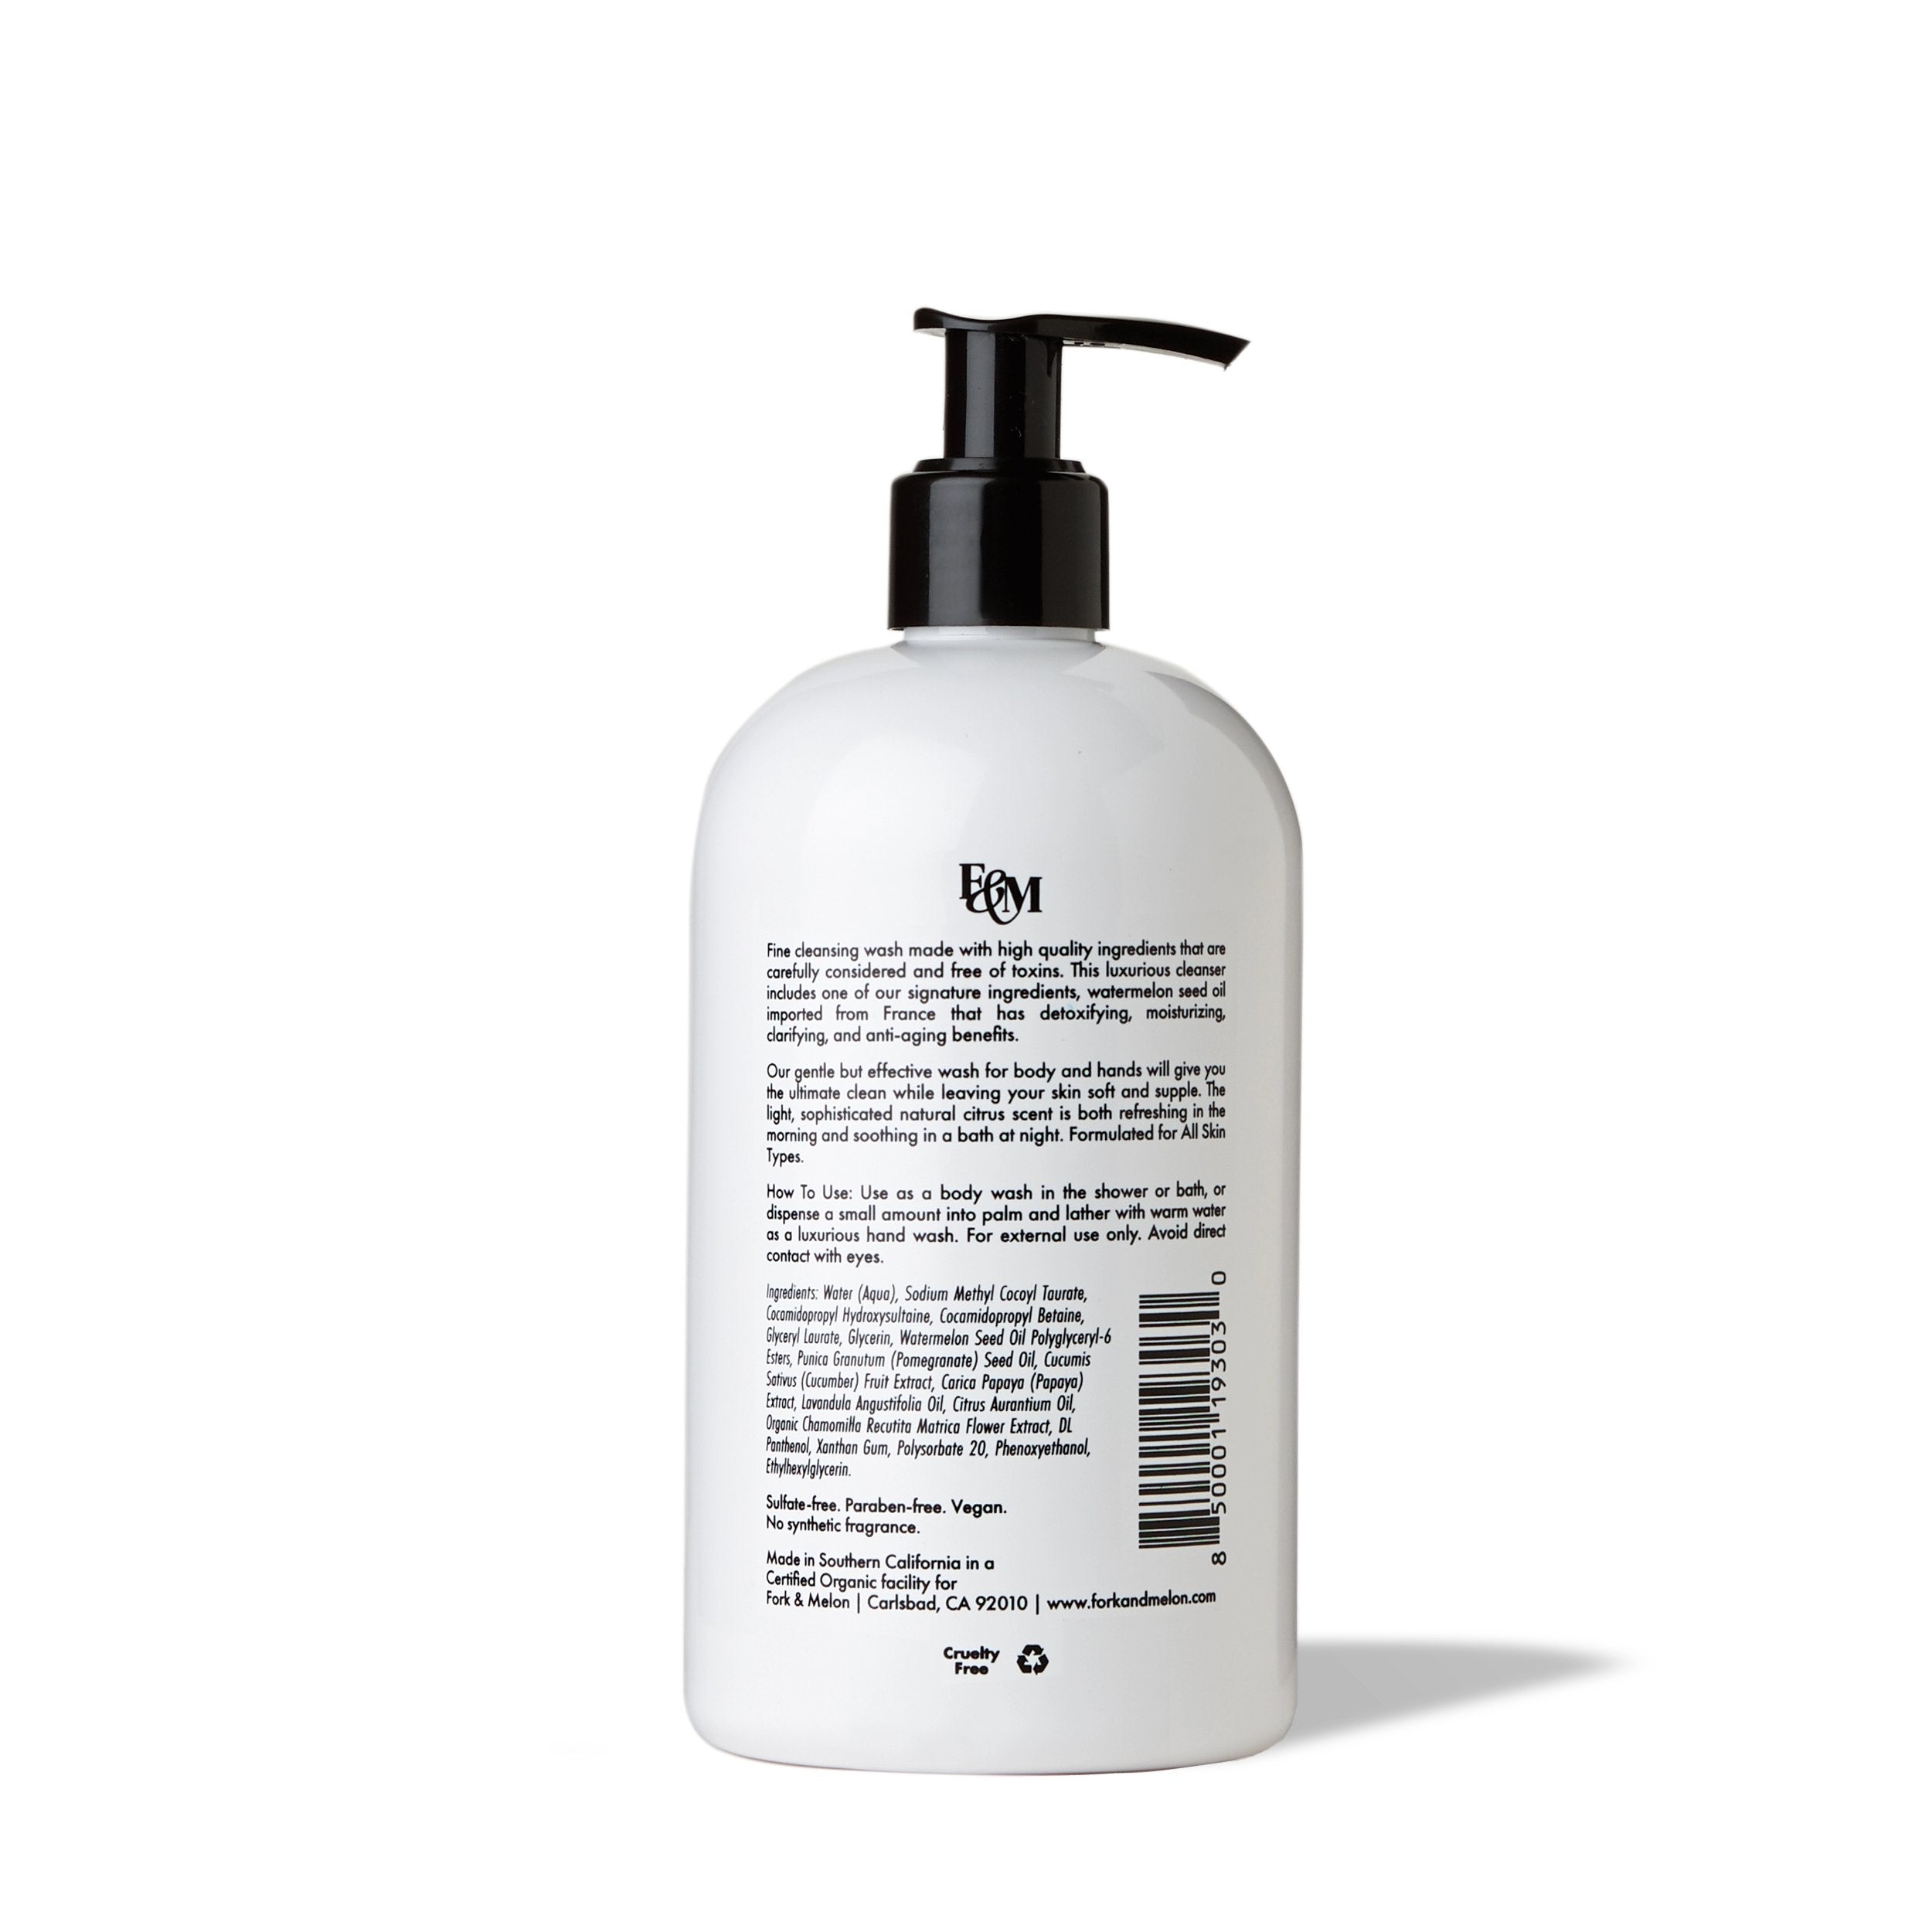 Fine Cleansing Wash for Body & Hands (16oz)